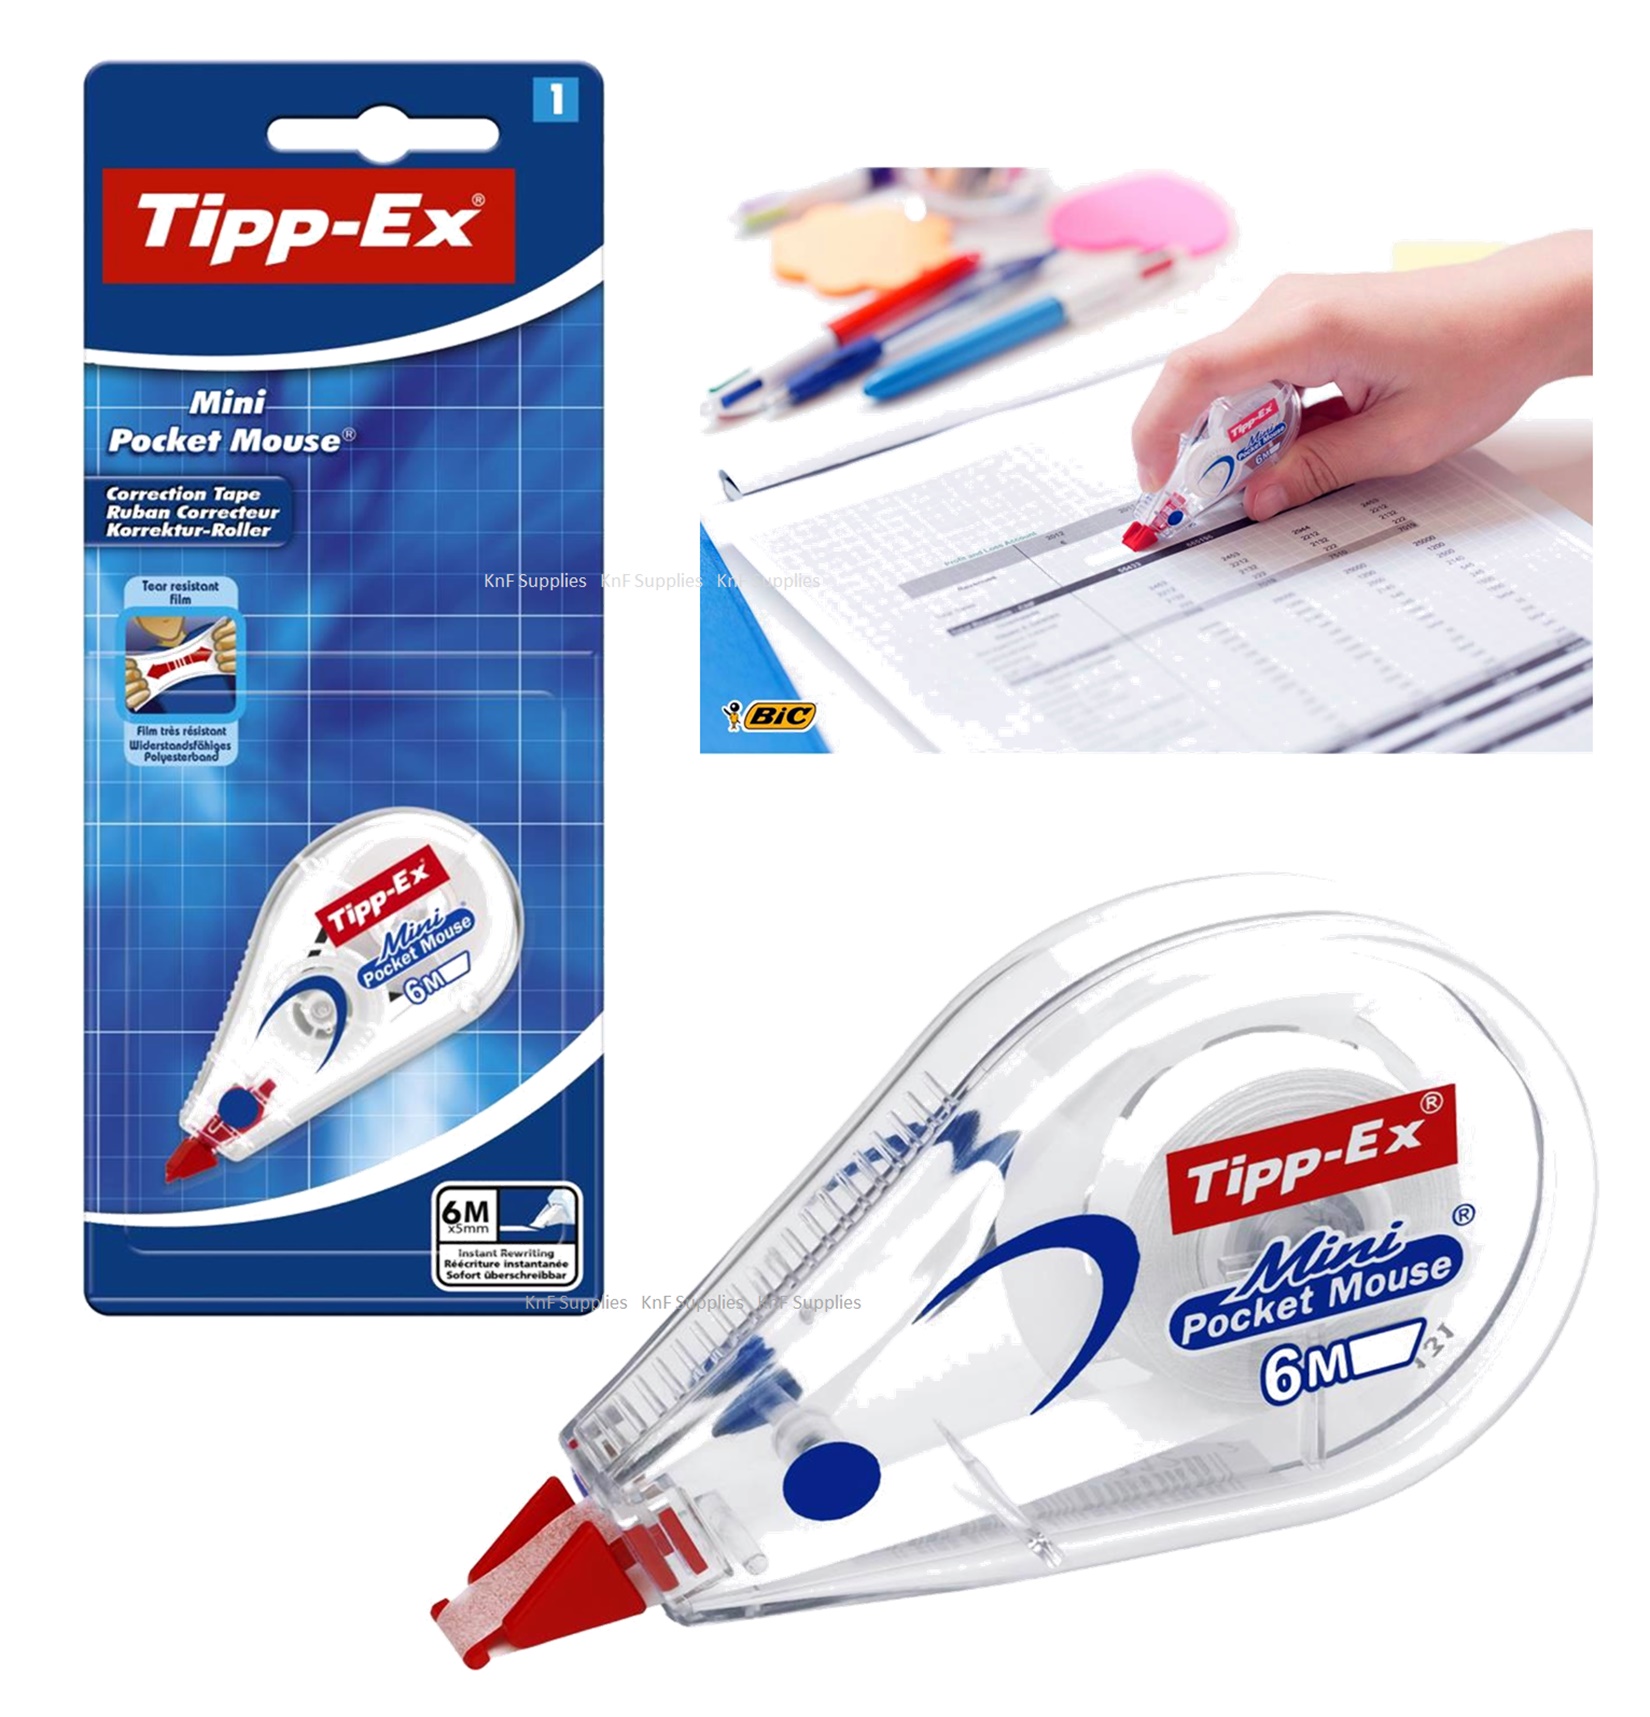 2 X TIPP-EX MINI MOUSE 6M VERSION WITH FREEE DELIVERY 